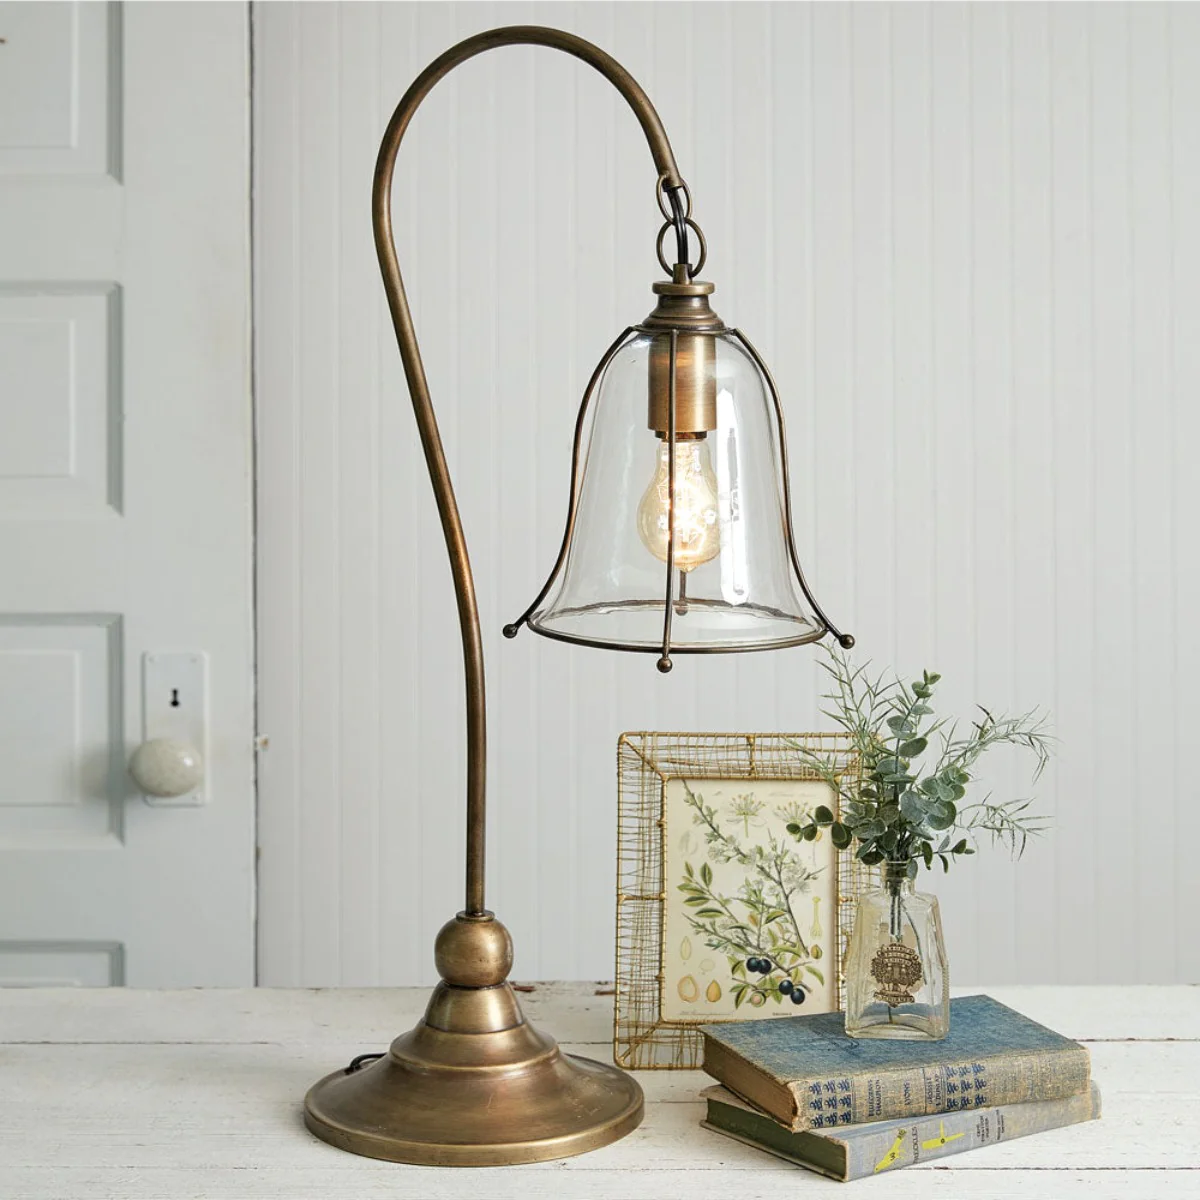 How to Value an Antique Lamps